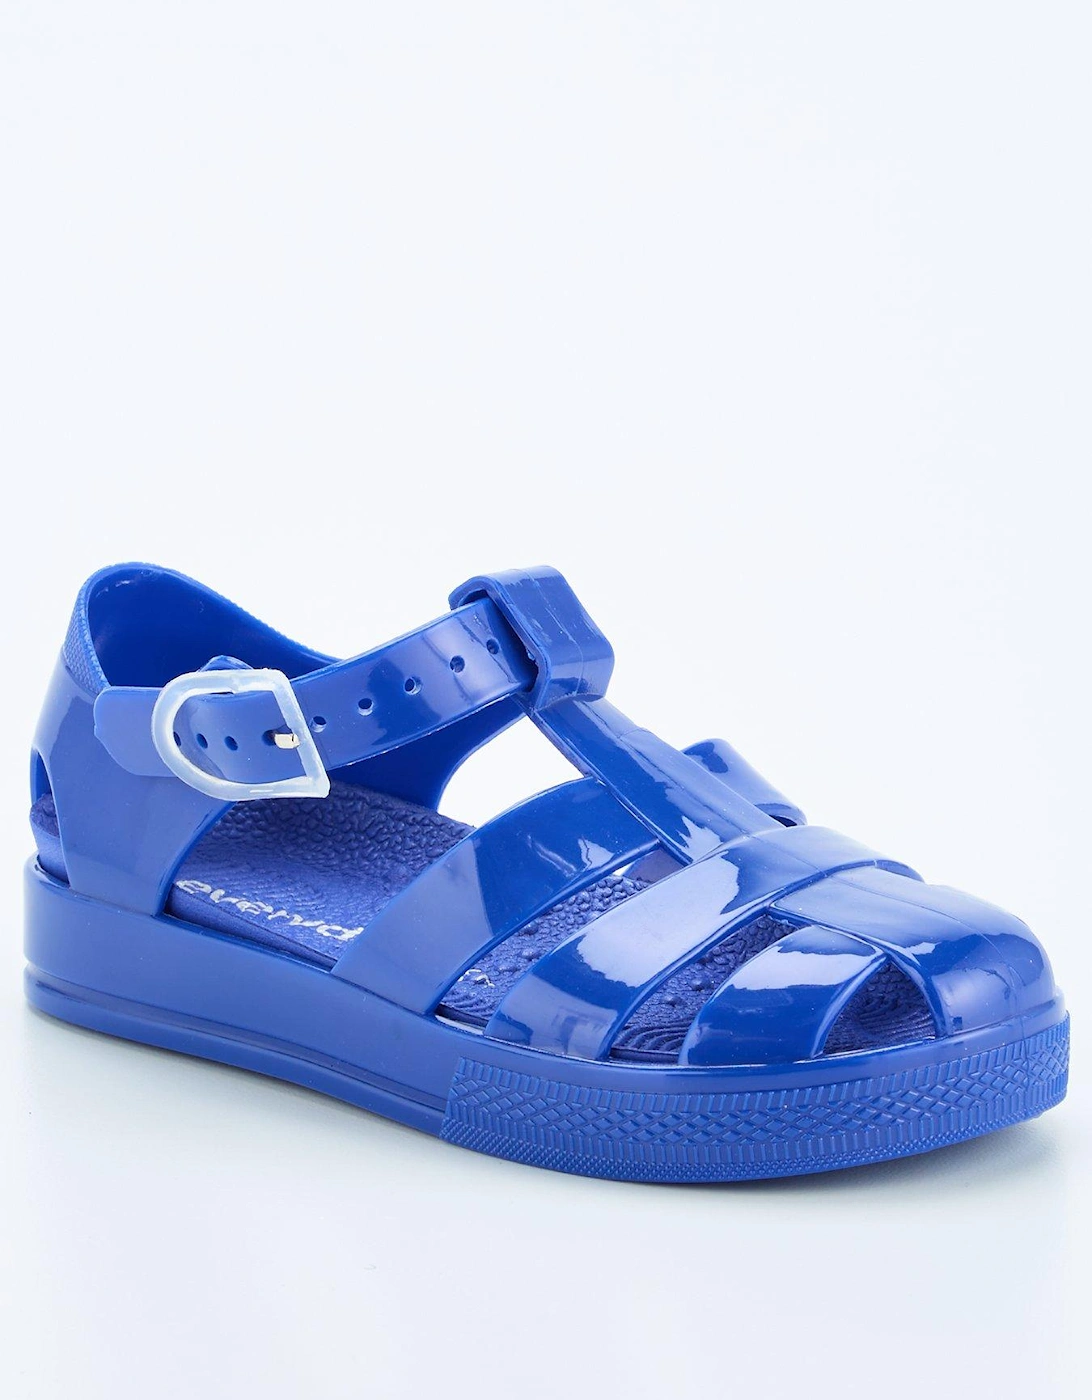 Boys Closed Toe Jelly Sandals - Blue, 7 of 6